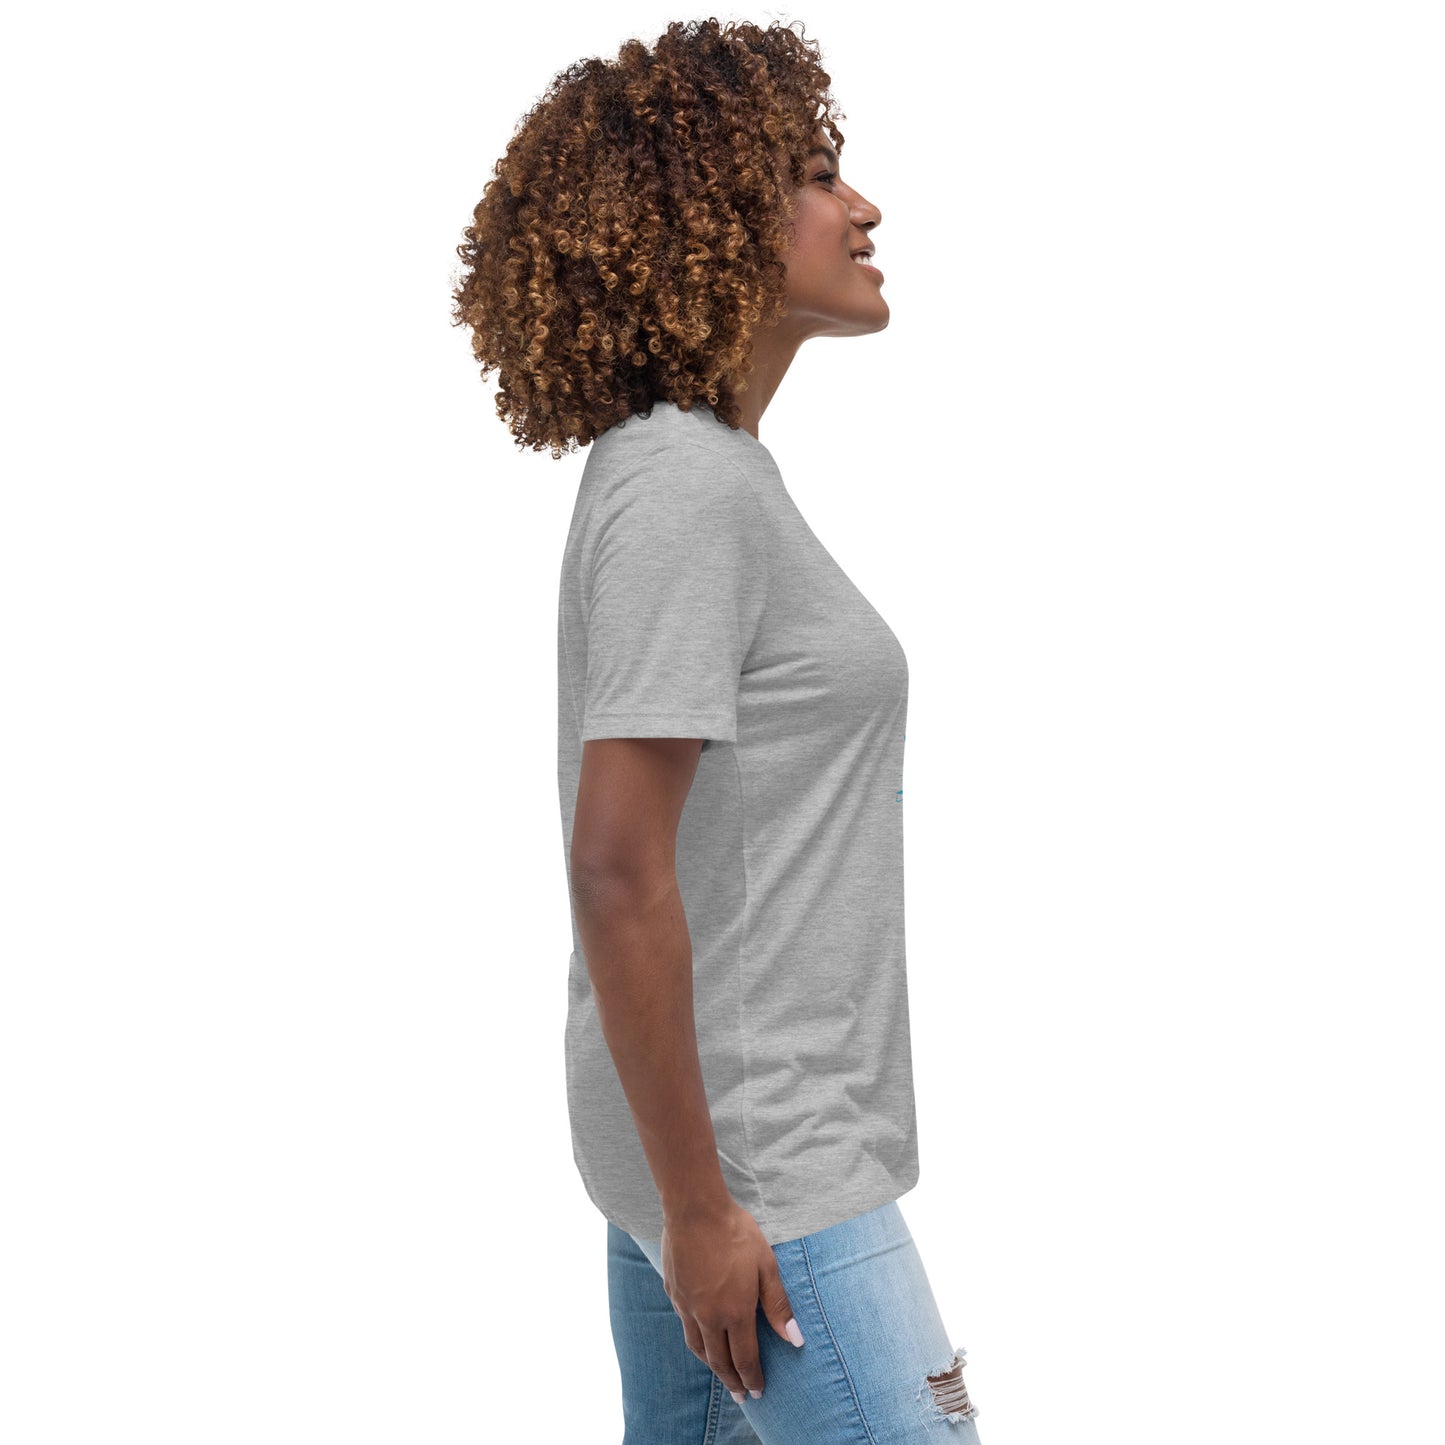 "There's a Hero in all of us"  Women's Relaxed T-Shirt